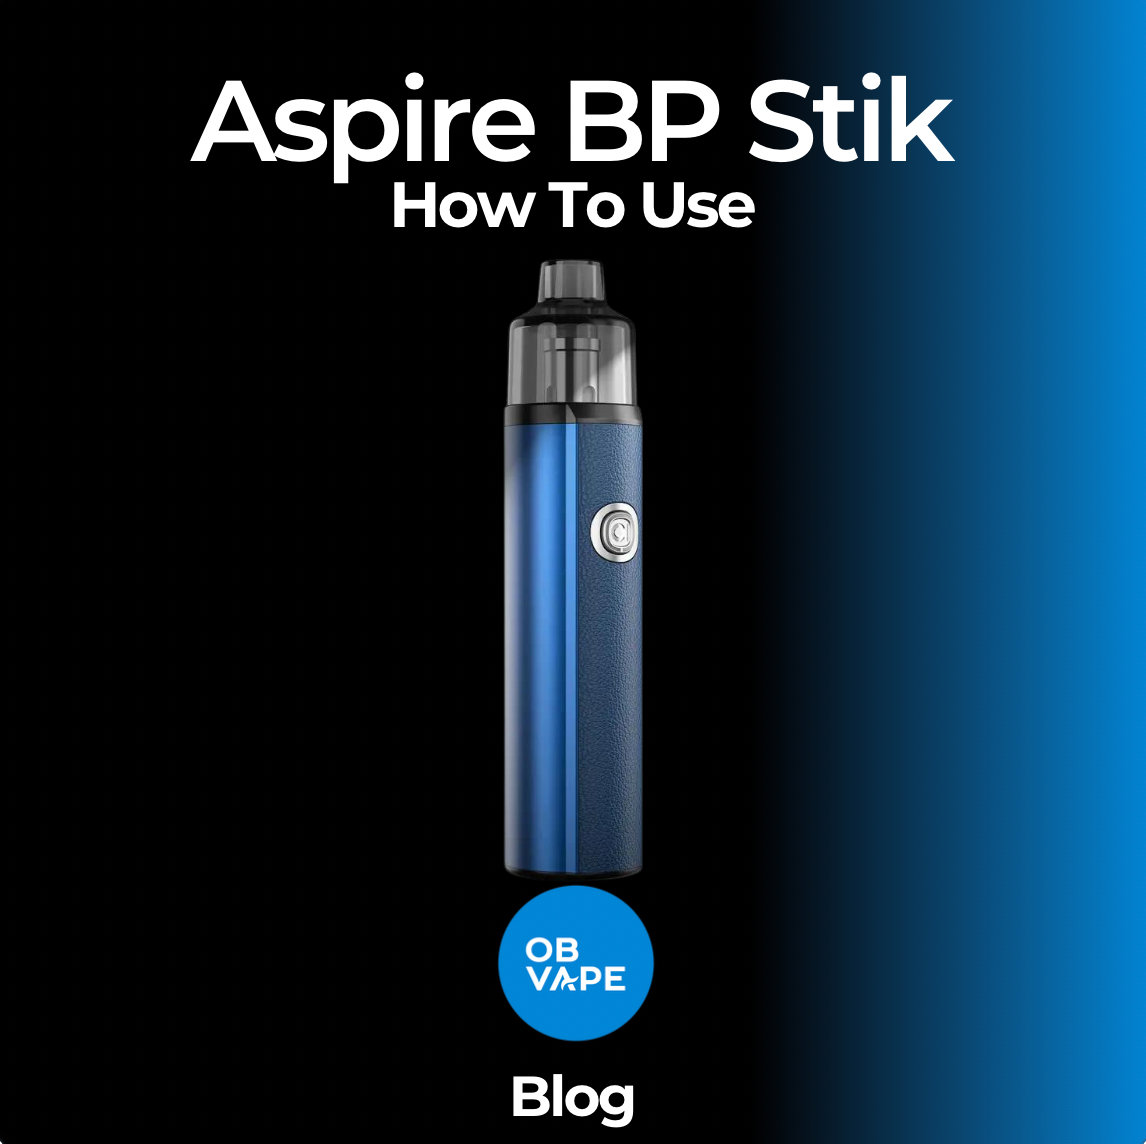 How To Use Aspire BP Stik